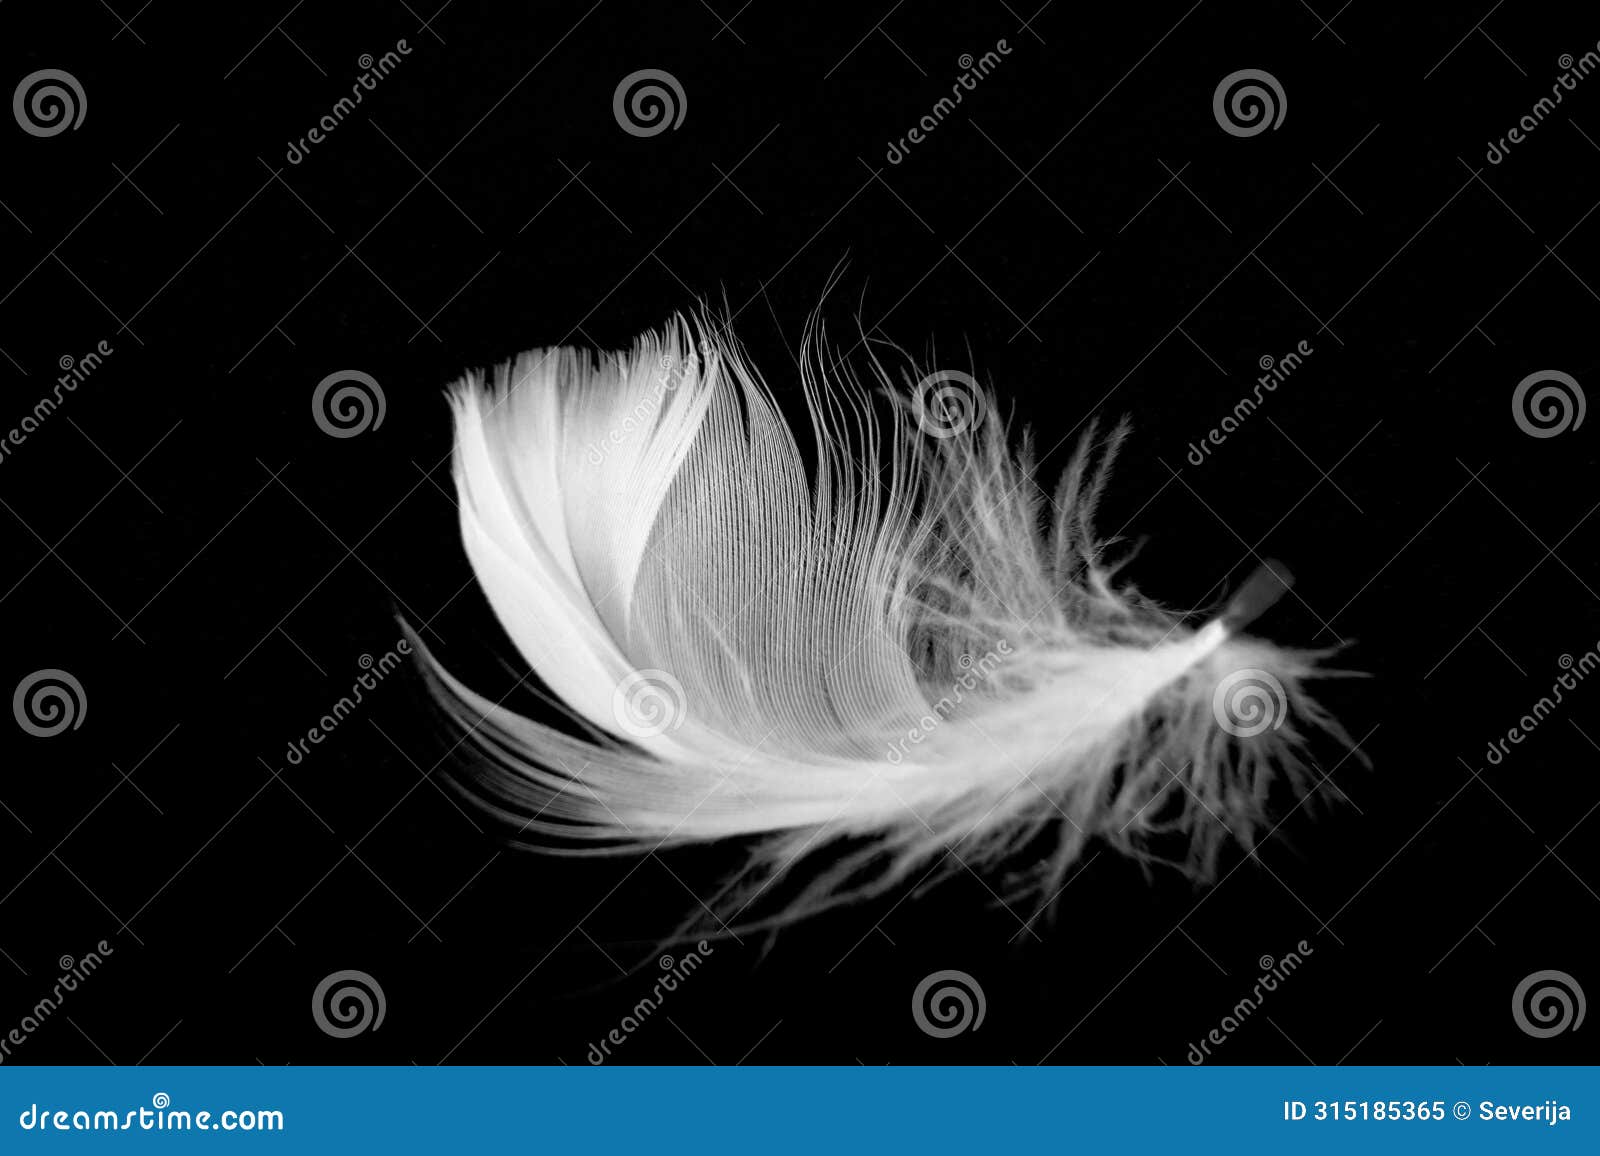 plumage feather pink  on black